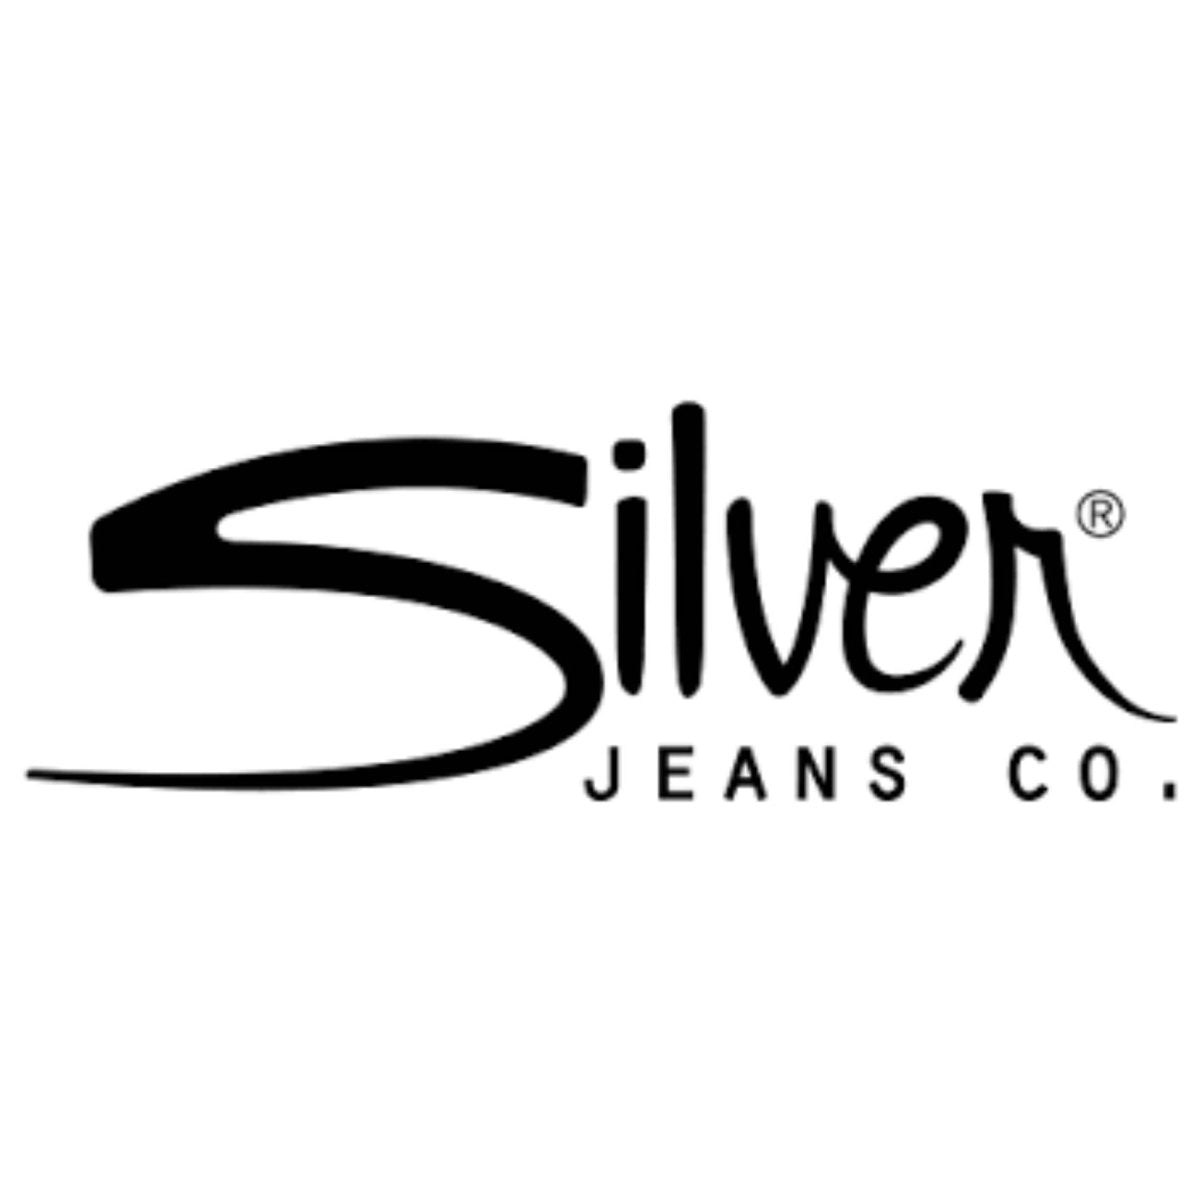 Silver Jeans Co. Boys Nathan Skinny Fit Stretch Denim Jeans, Sizes 4-22 